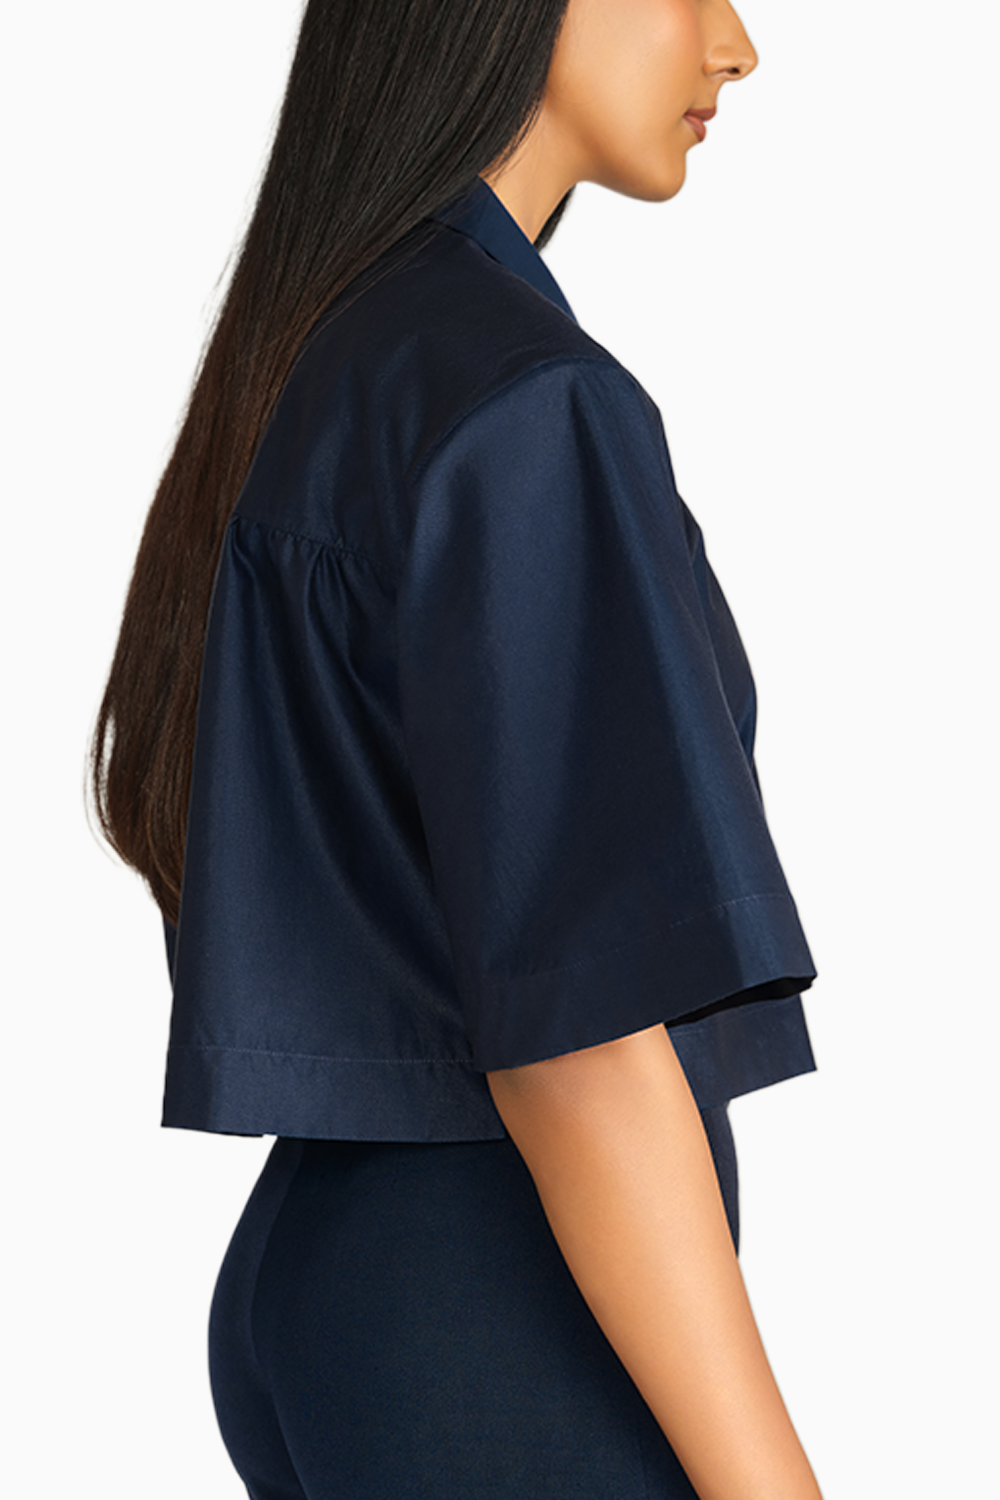 Navy Blue Egyptian Cotton Cropped Bowling Shirt